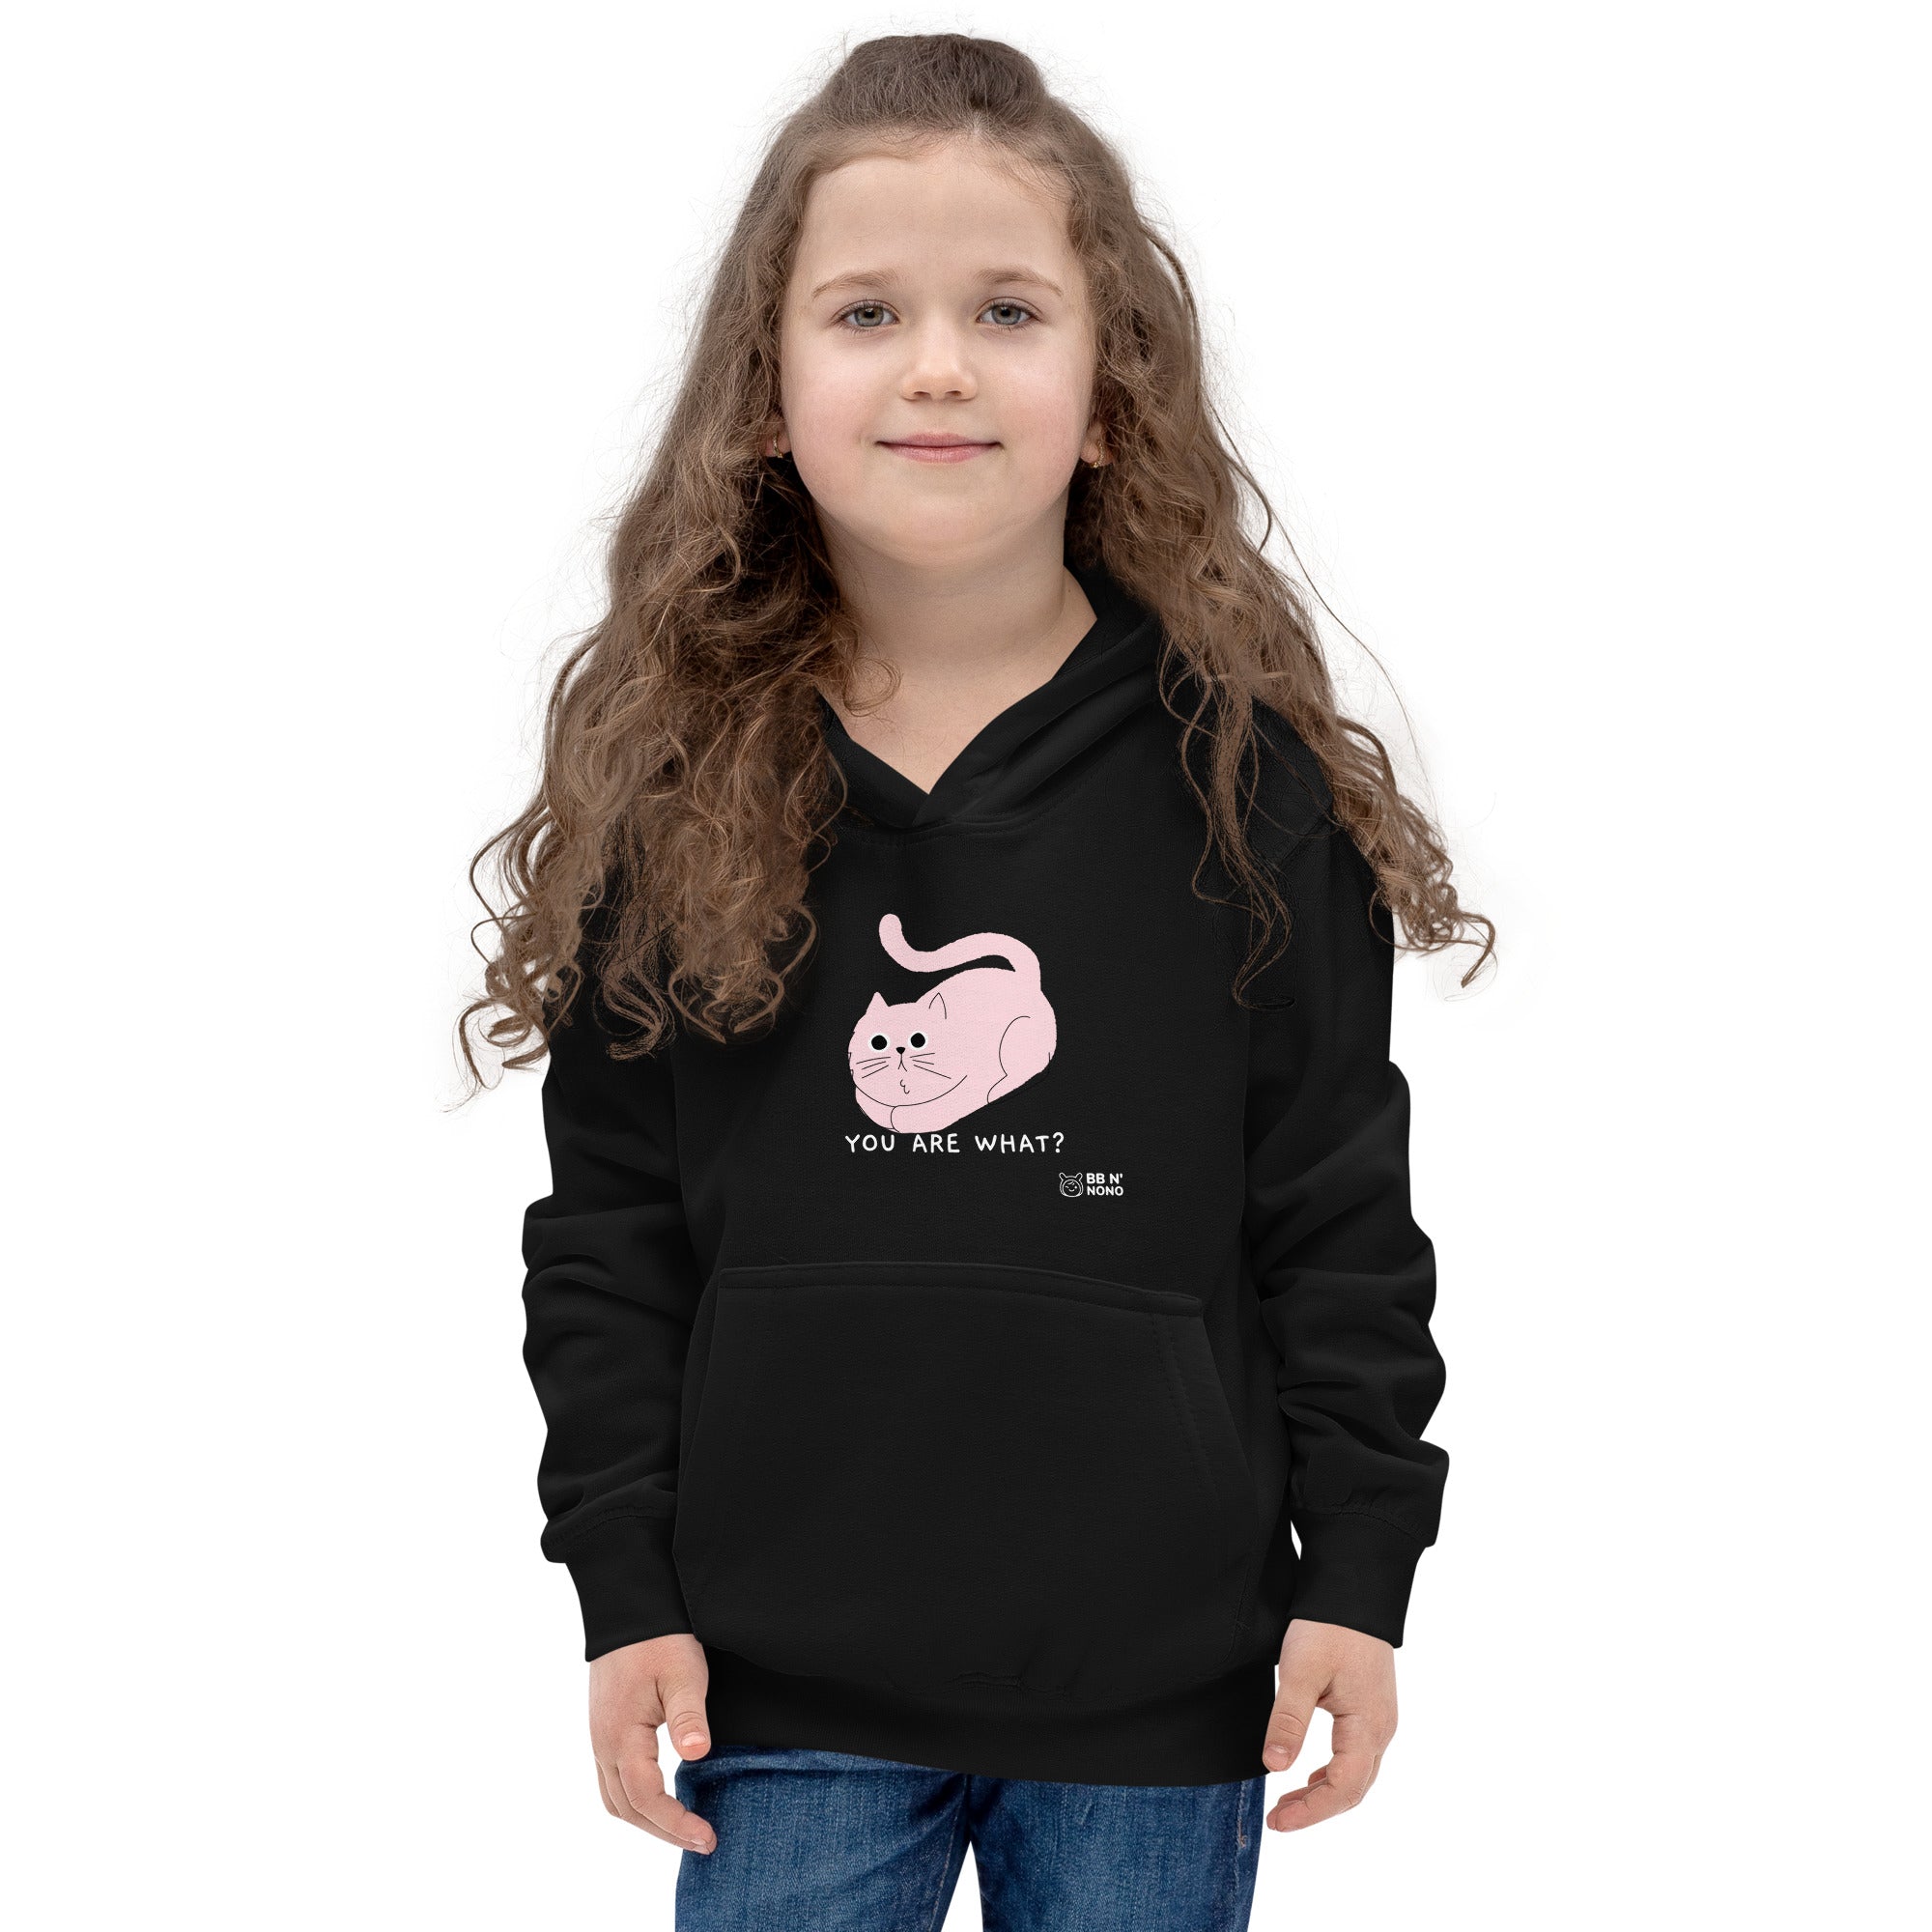 You are what? - Kids Hoodie